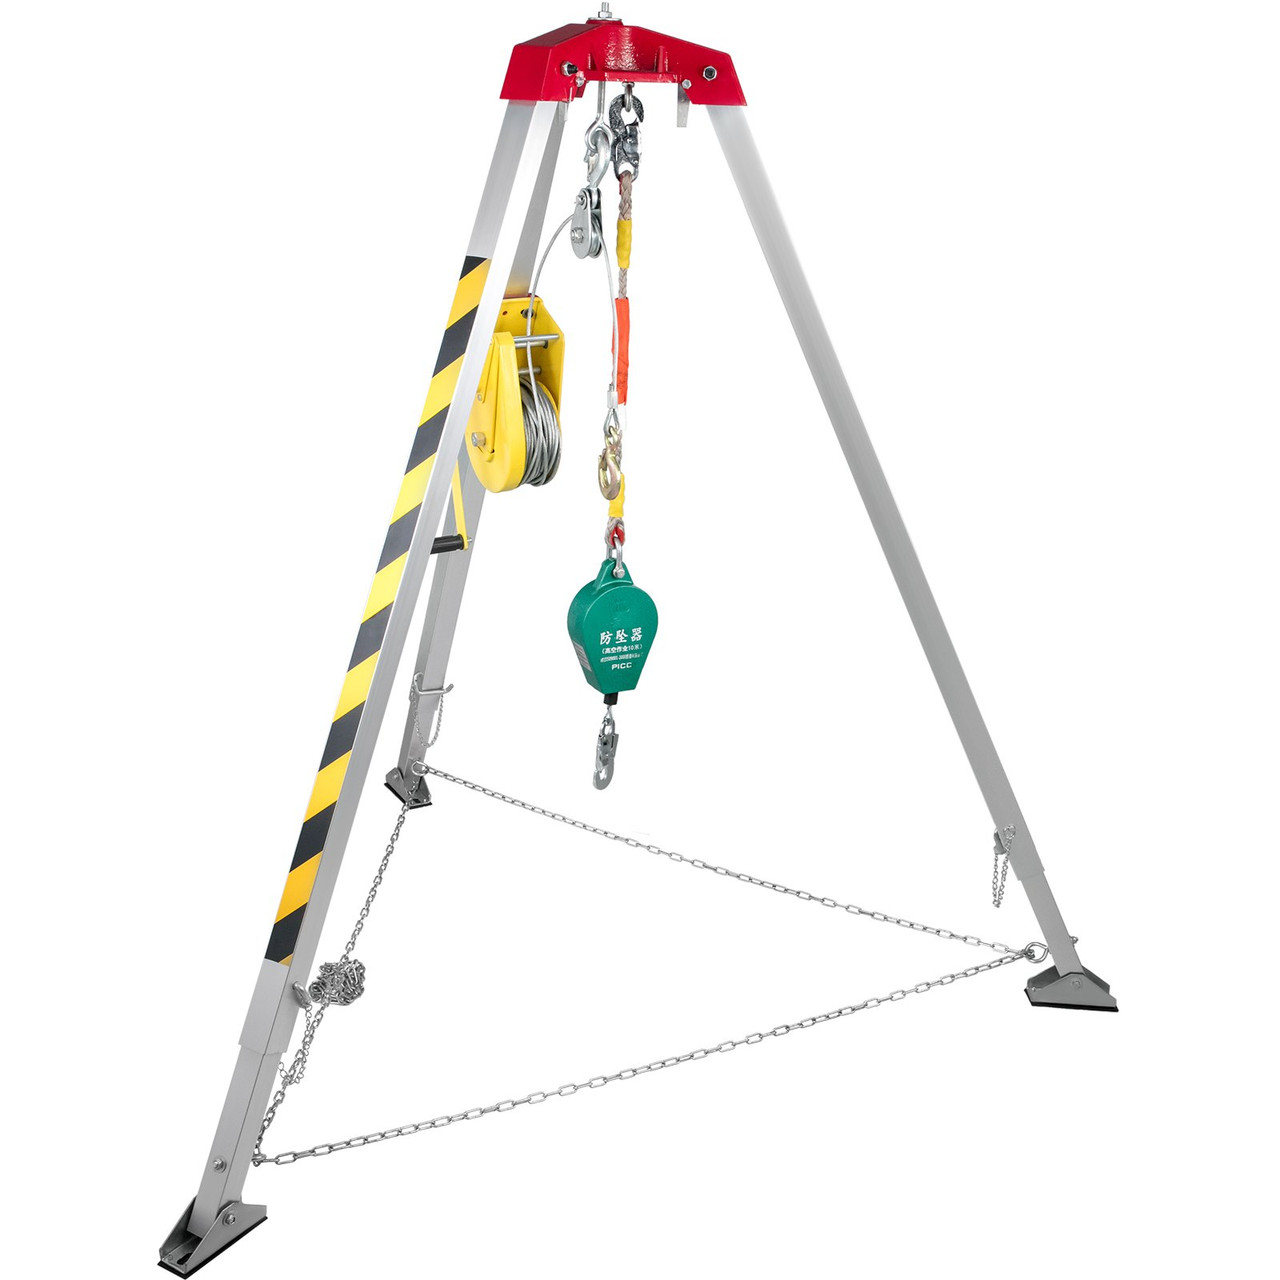 Confined Space Tripod with 2600lbs Winch Confined Space Kit 8' Legs and 98' Cable Confined Space Rescue Tripod with 32.8' Fall Protection for Confined Space Rescue